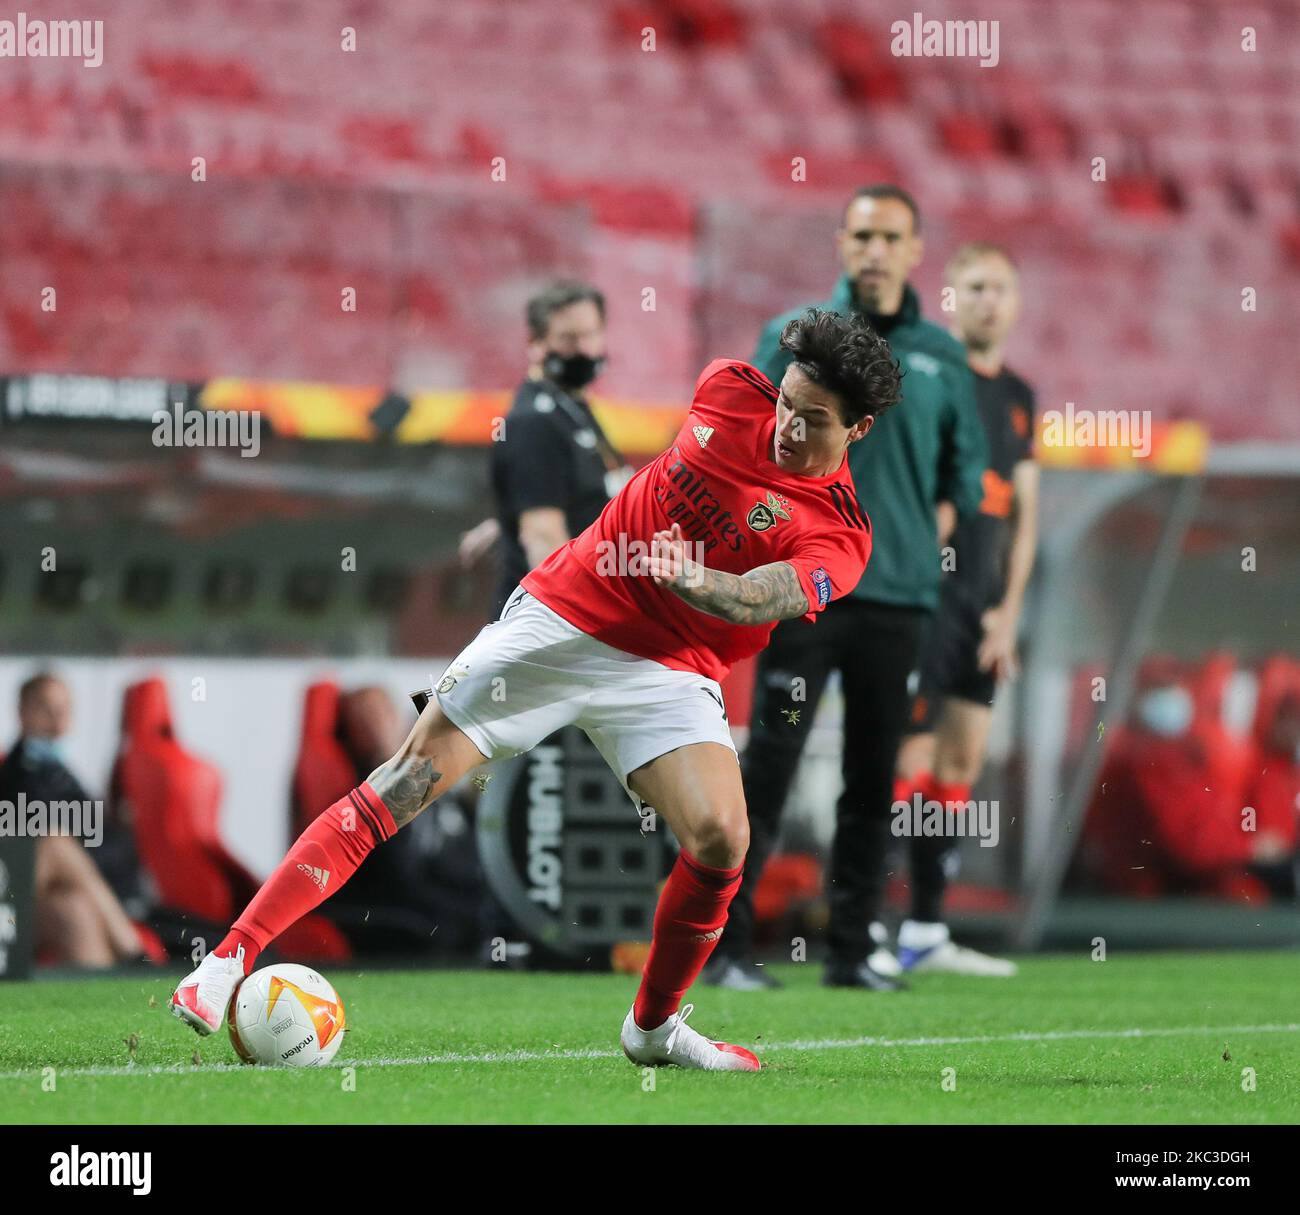 Darwin Nunez Luis of SL Benfica in action during the UEFA Europa League Group D stage match between SL Benfica and Rangers FC at Estadio da Luz on November 5, 2020 in Lisbon, Portugal. (Photo by Paulo Nascimento/NurPhoto) Stock Photo